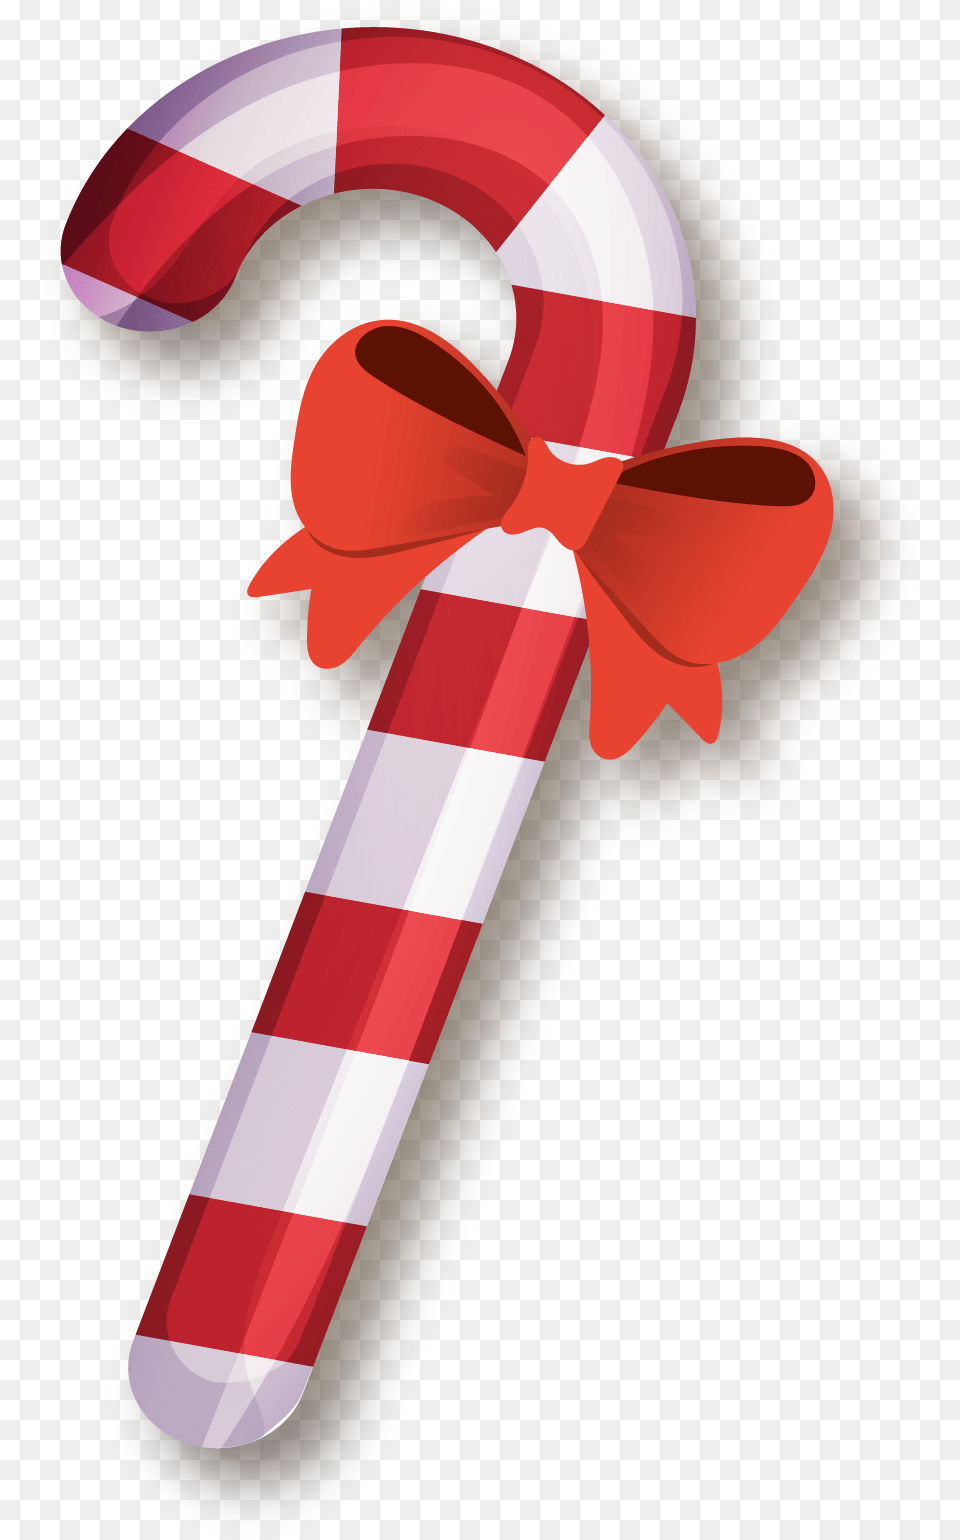 Candy Cane Christmas Sugar Christmas Candy Cane, Stick, Food, Sweets, Dynamite Png Image